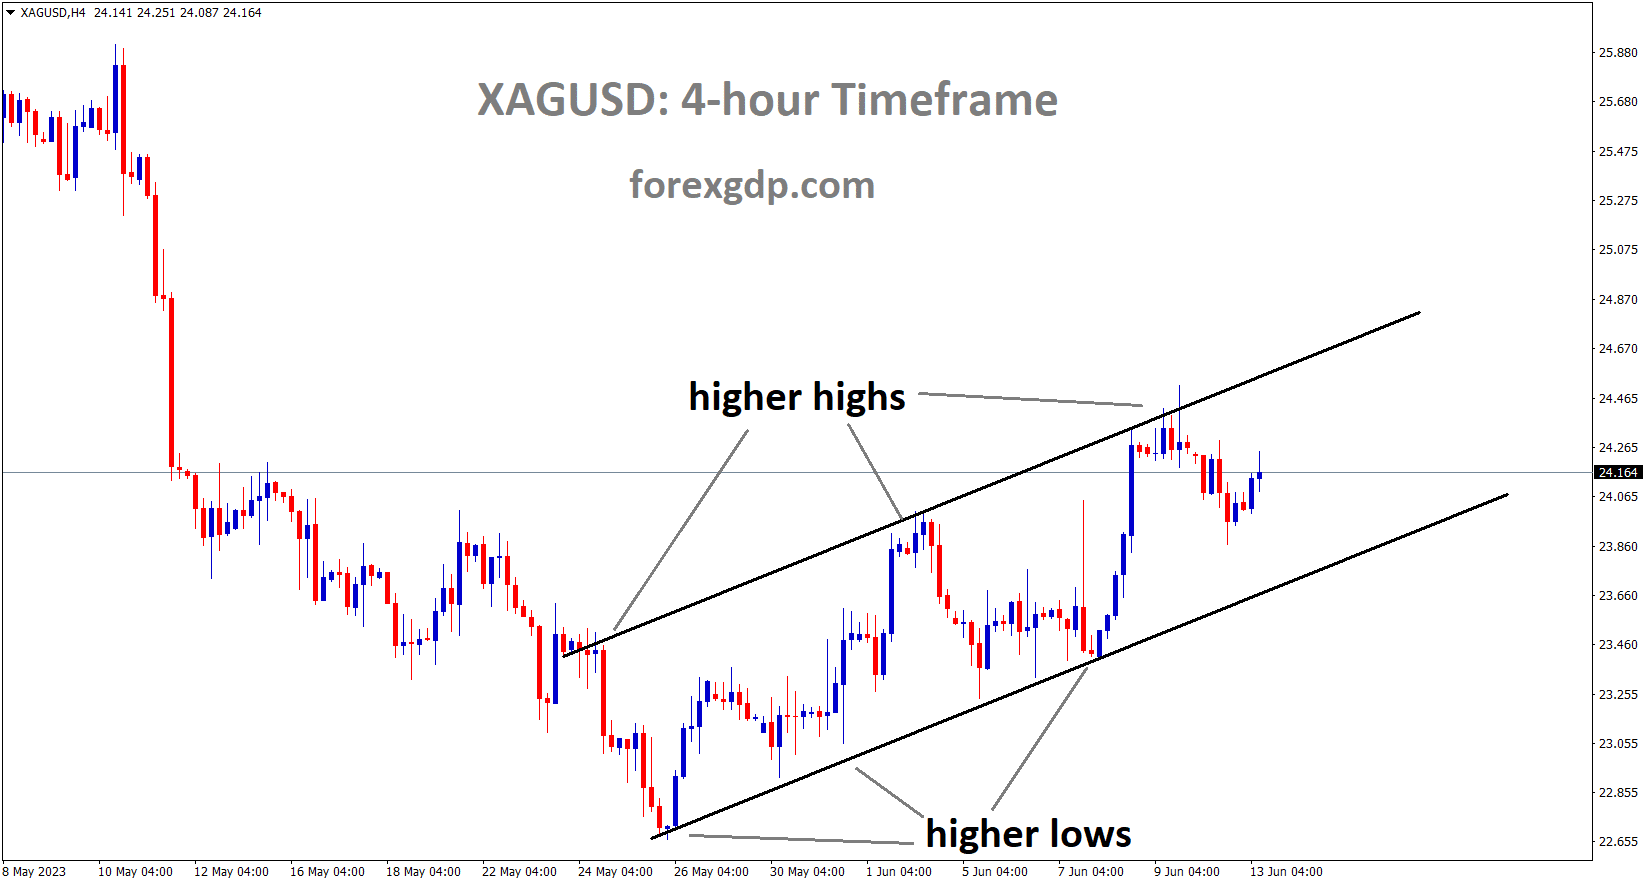 XAGUSD Silver Price is moving in an Ascending channel and the market has fallen from the higher high area of the channel 1